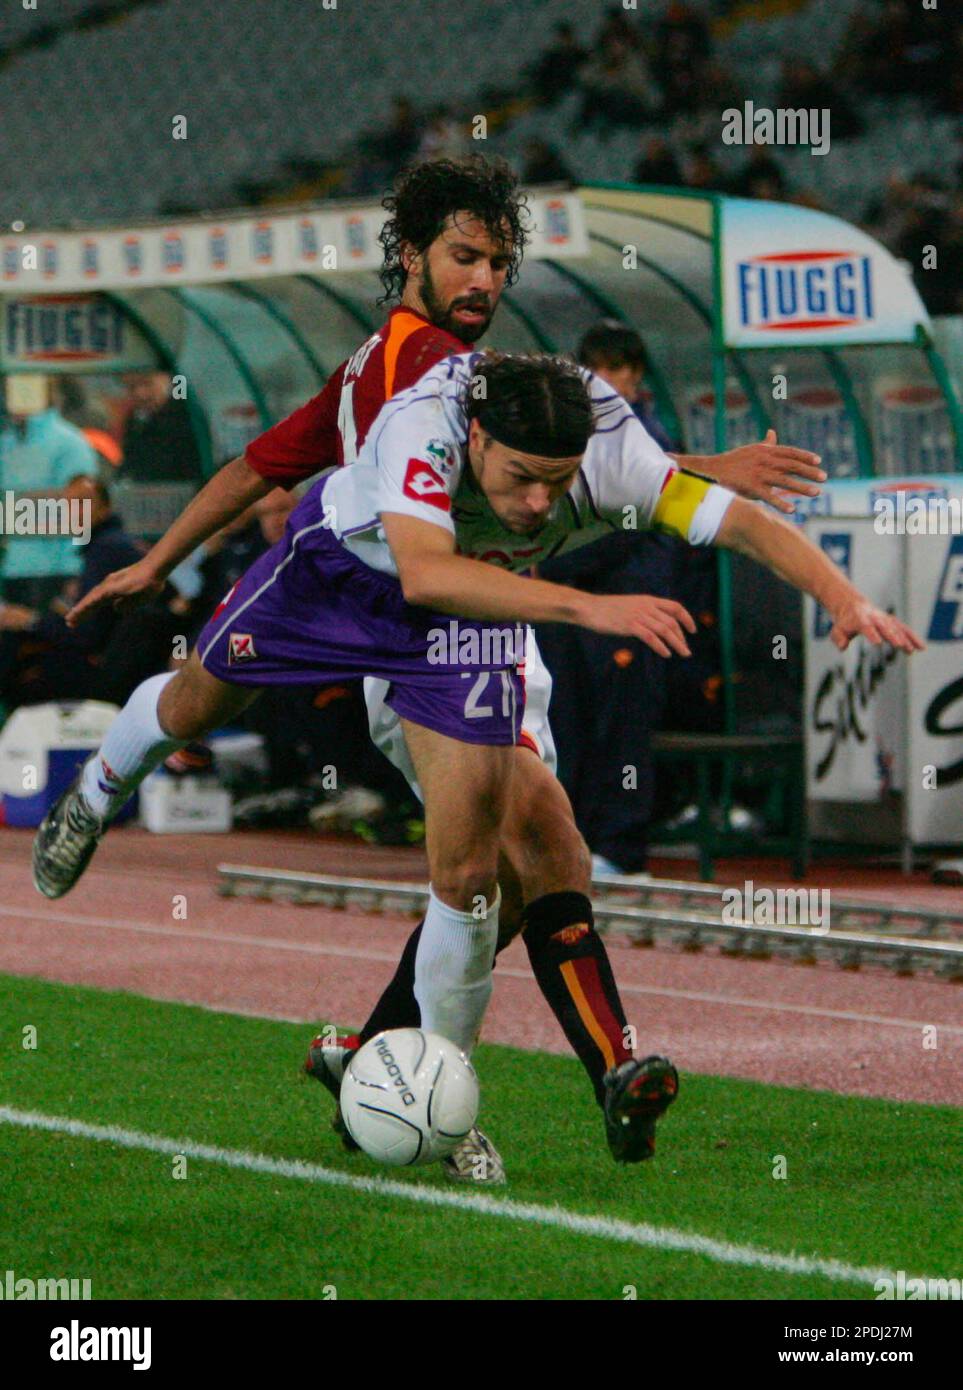 Roma's Damiano Tommasi, in background, pursues Fiorentina's Tomas Ujfalusi,  during the Italian Serie A major league soccer match between Roma and  Fiorentina at Rome's Olympic stadium, Sunday, Nov. 27, 2005. Tommasi  treasured